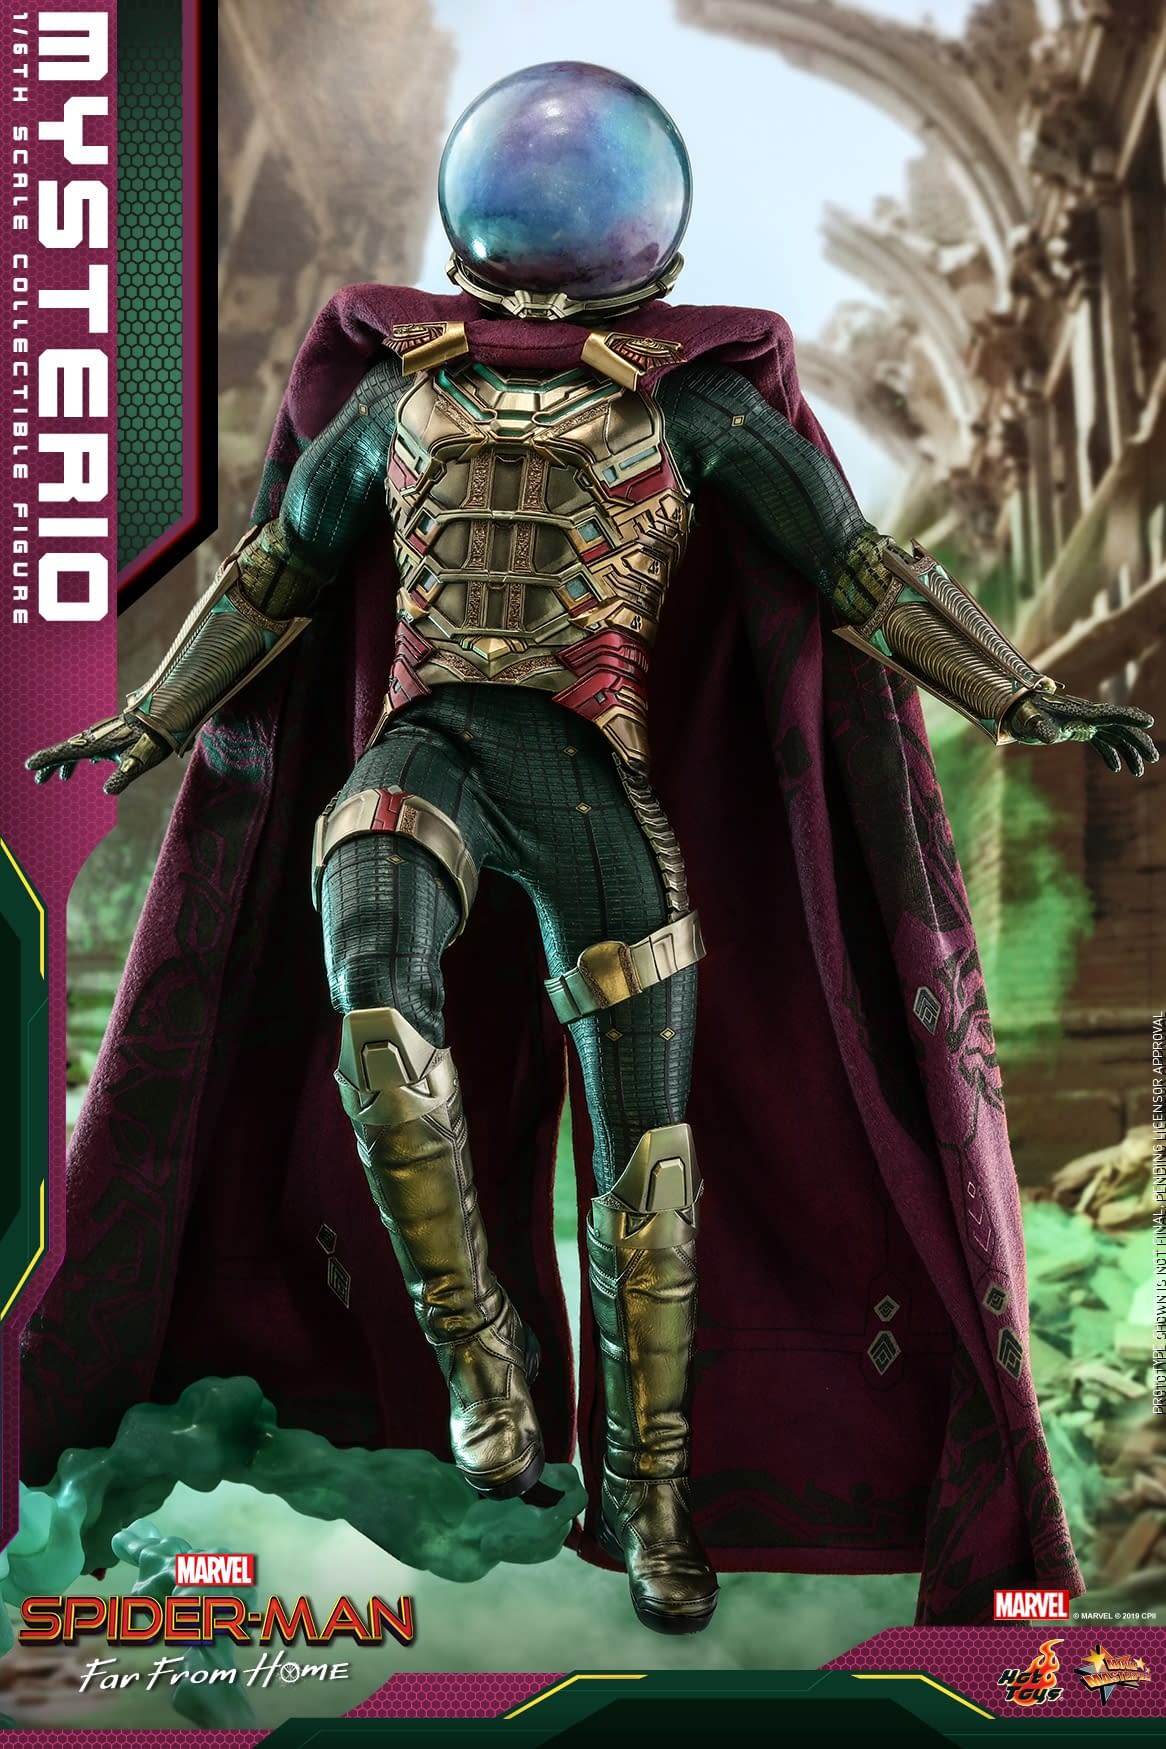 Mysterio Is the Truth with New Hot Toys Figure!